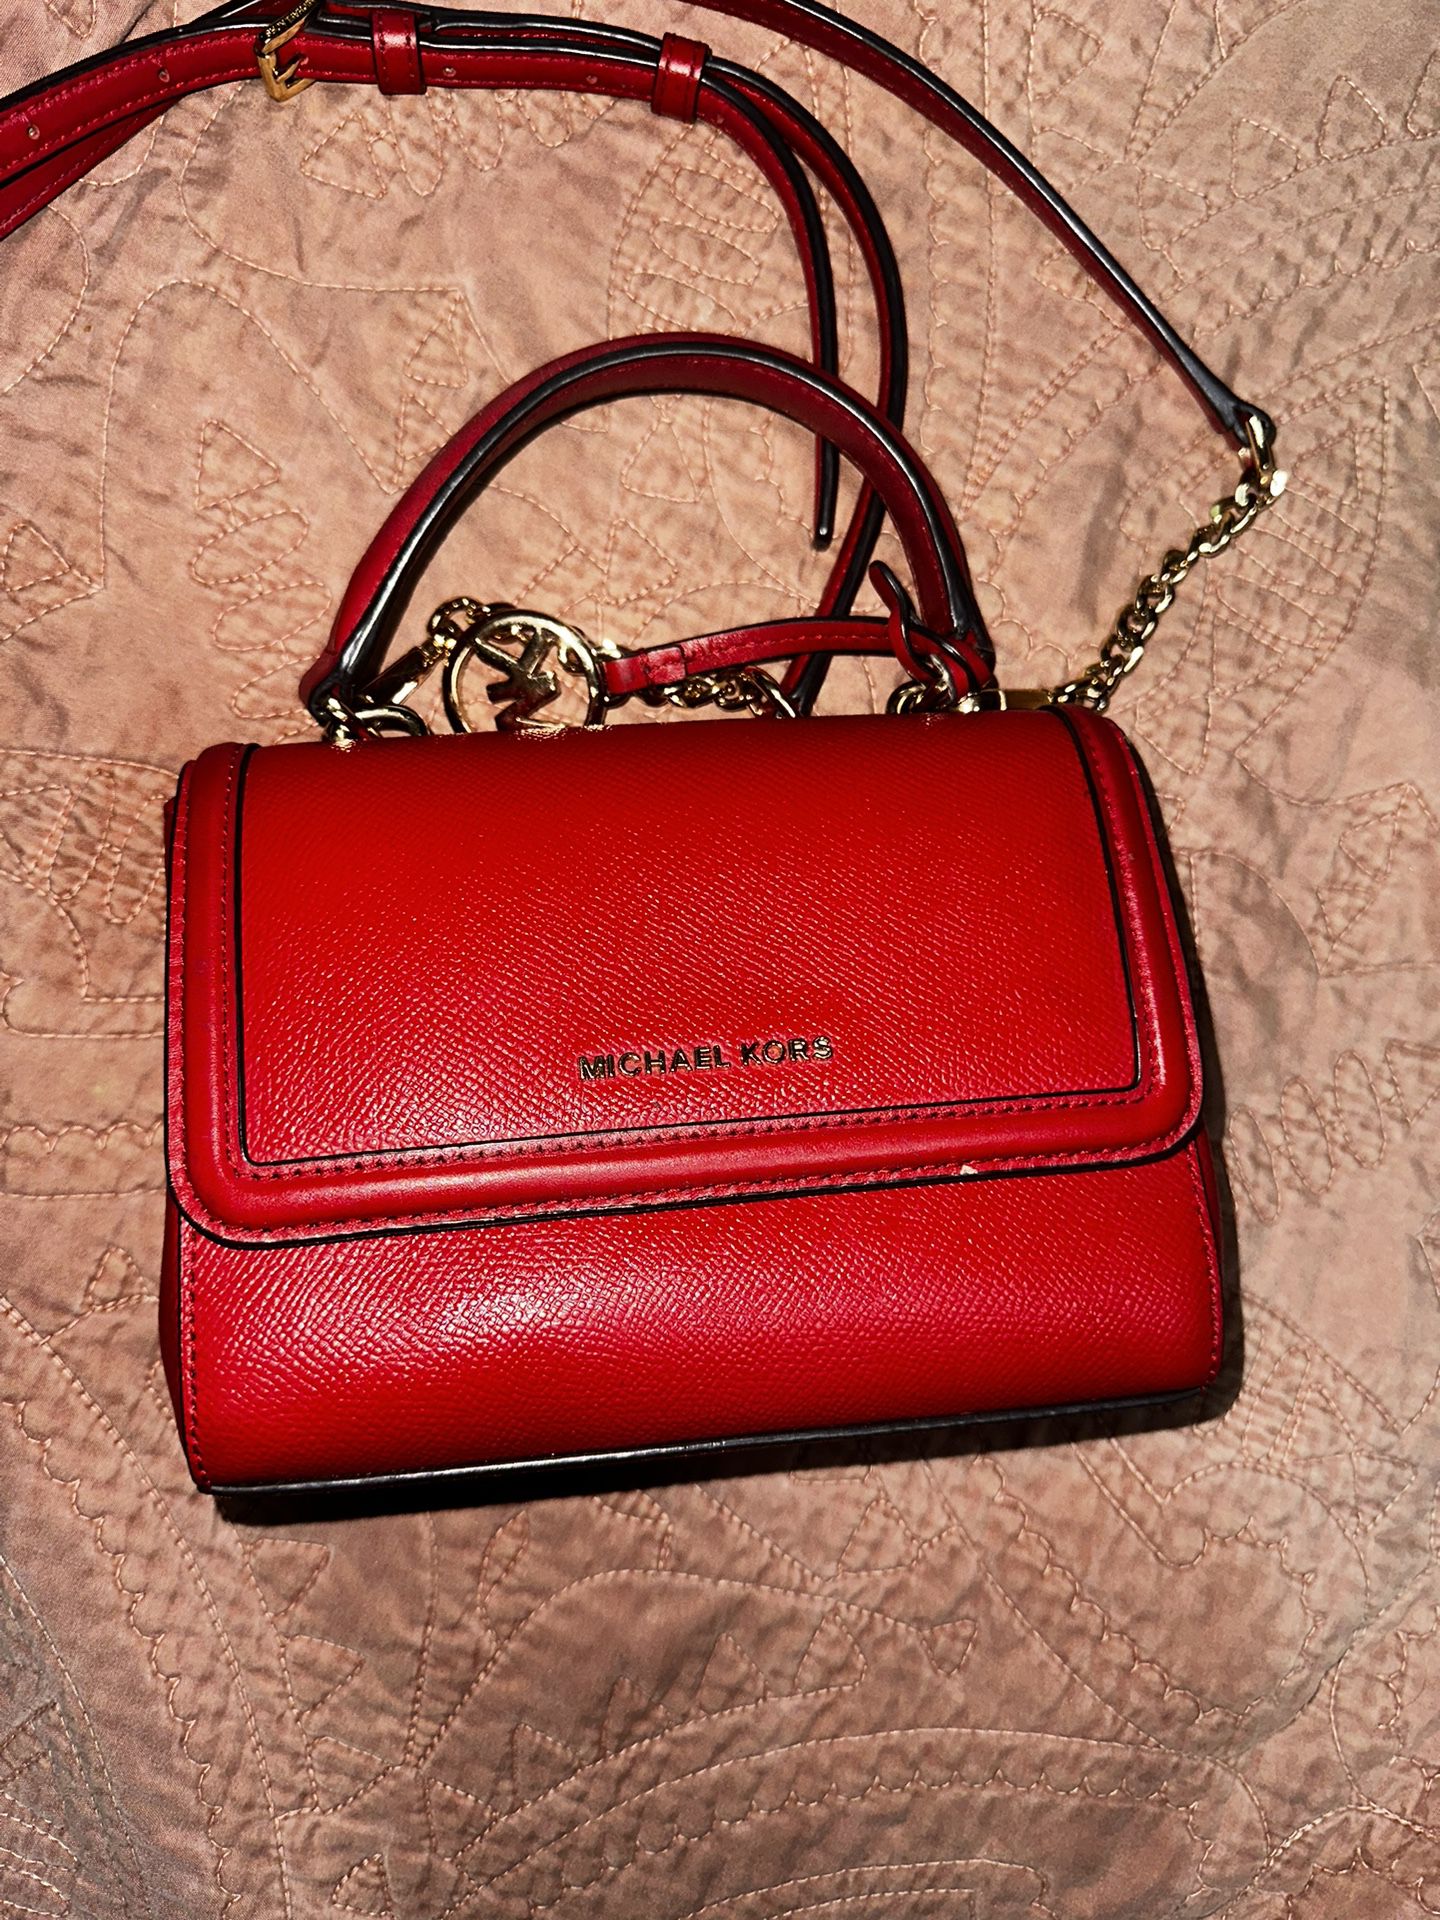 Small Red Michael Kors Purse for Sale in Fontana, CA - OfferUp